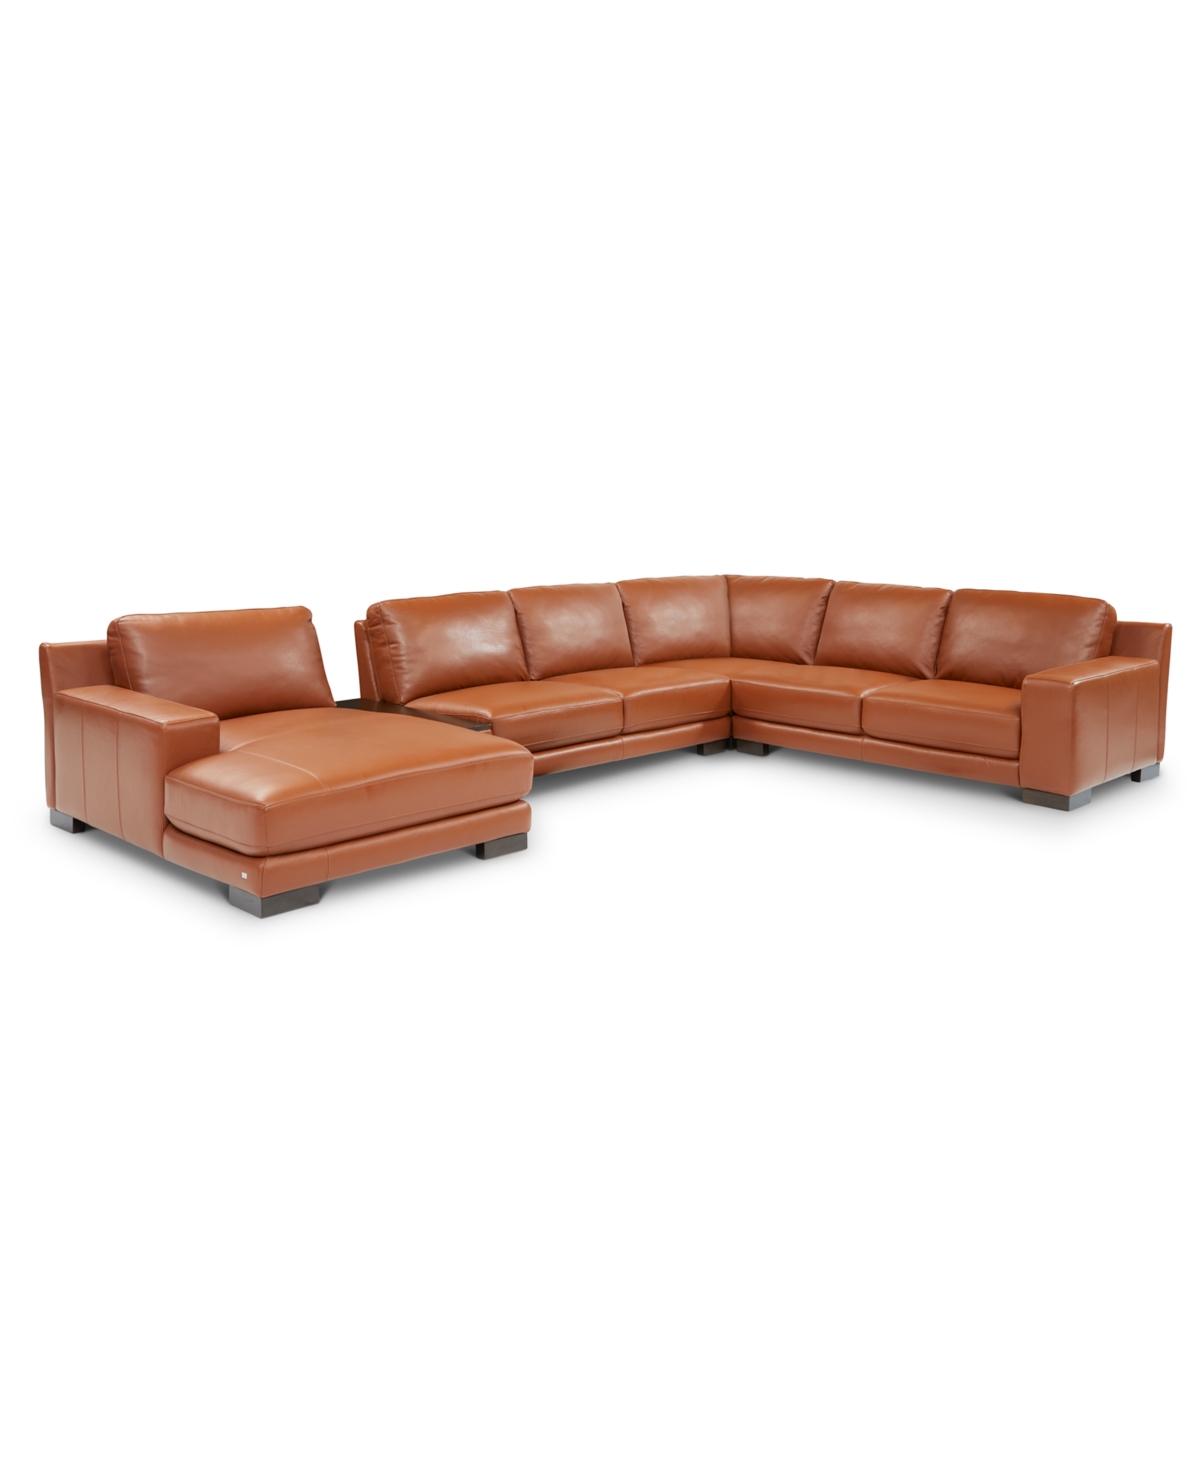 Macy's Darrium 5pc Leather Sectional With Console, Created For  In Cognac